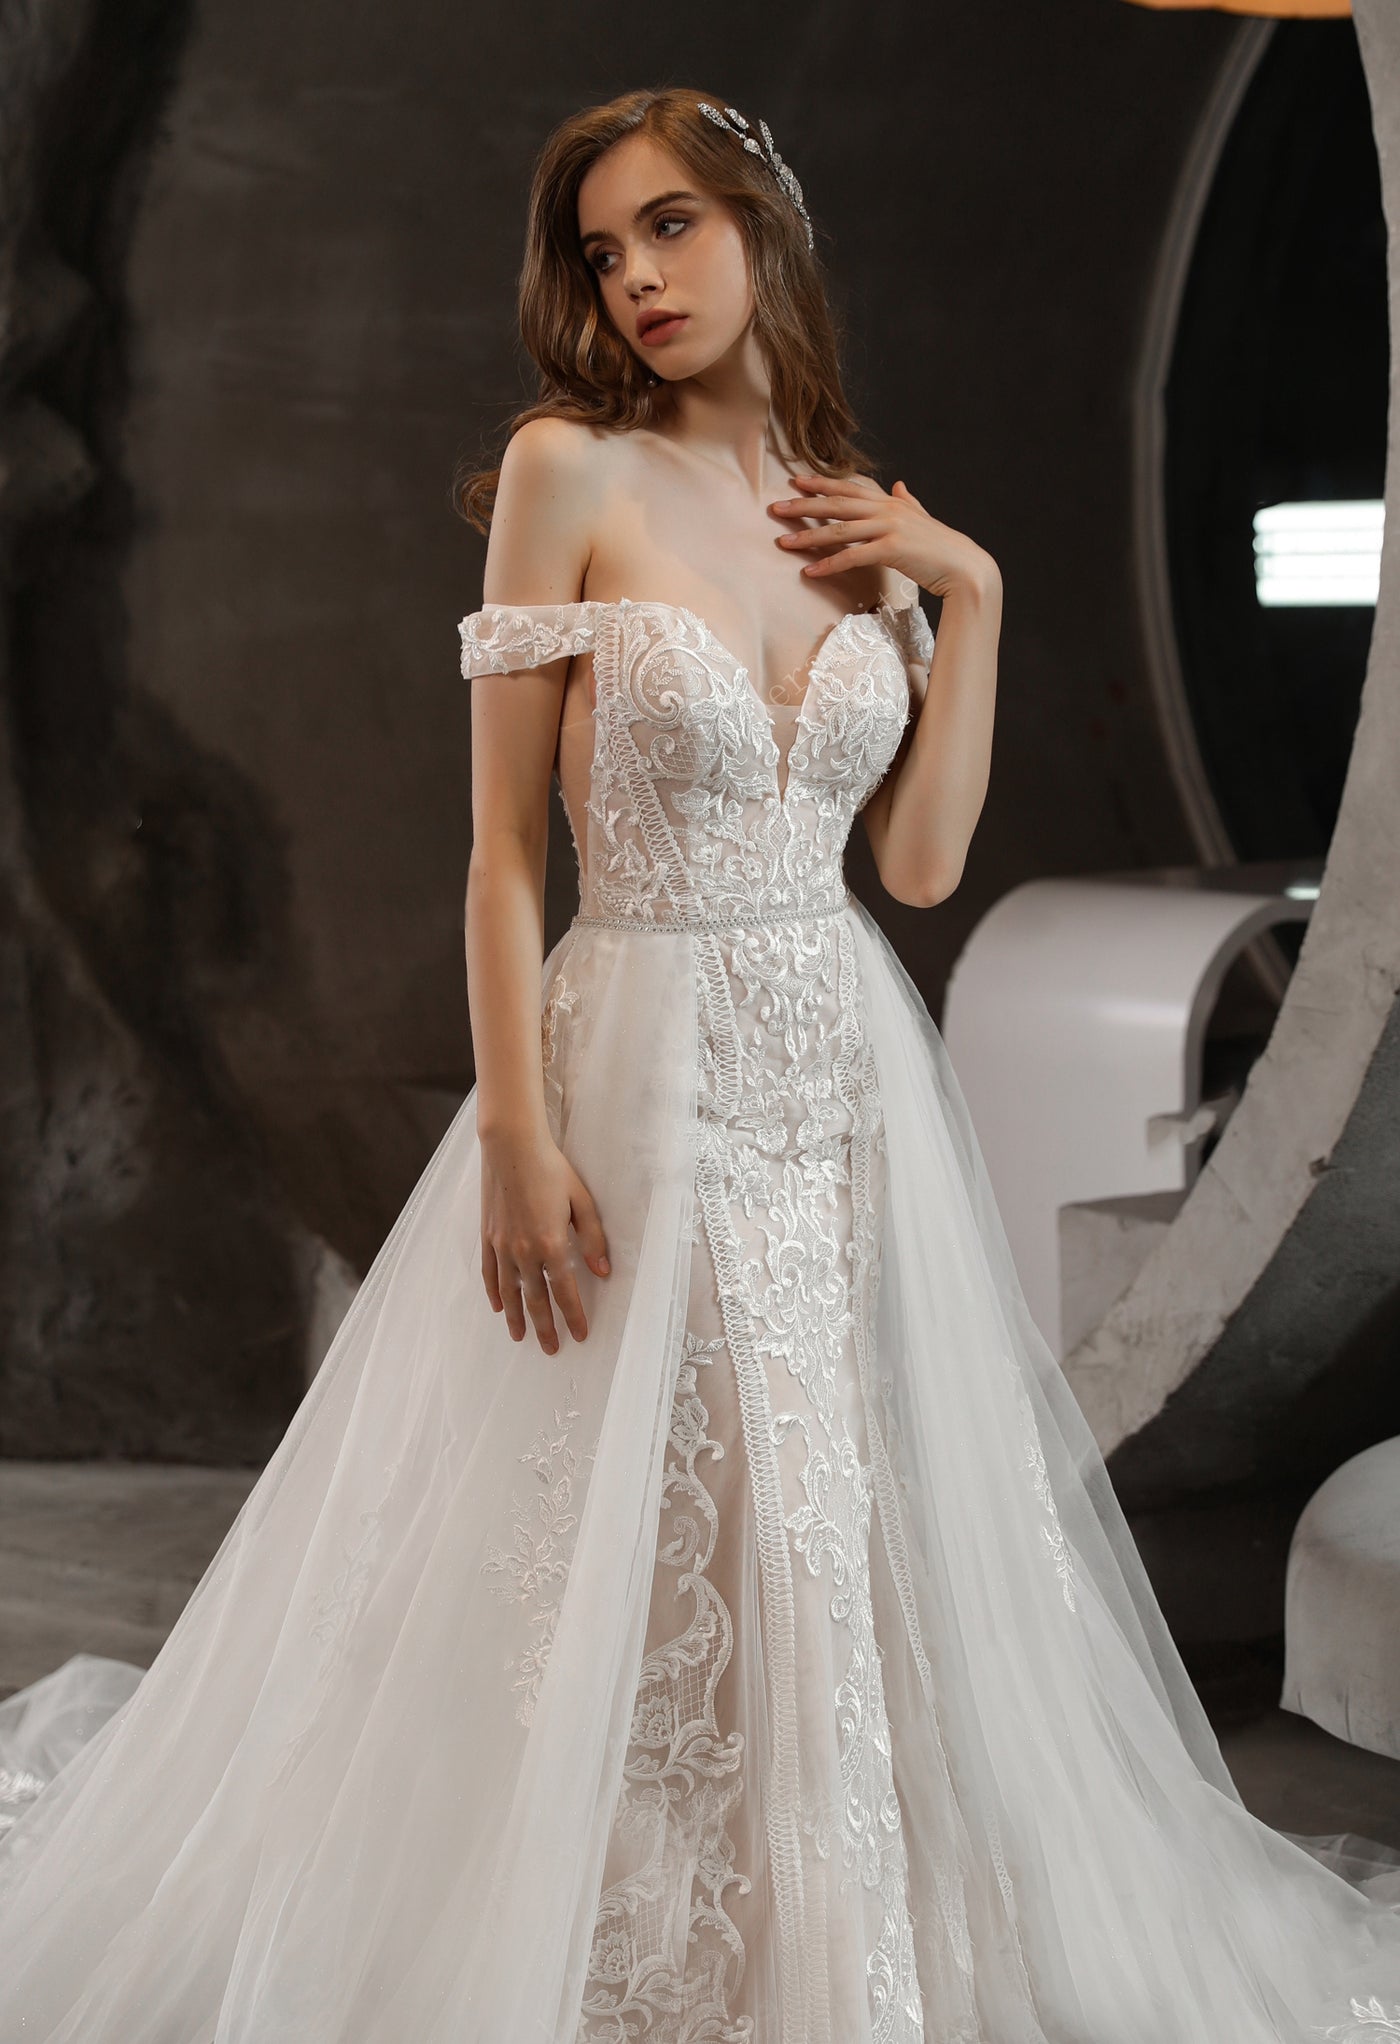 A woman in an elegant off-the-shoulder wedding dress with lace accents posing in an indoor setting. 
Product Name: Gorgeous Lace Fit and Flare Bridal Gown with Detachable Train by Bergamot Bridal.